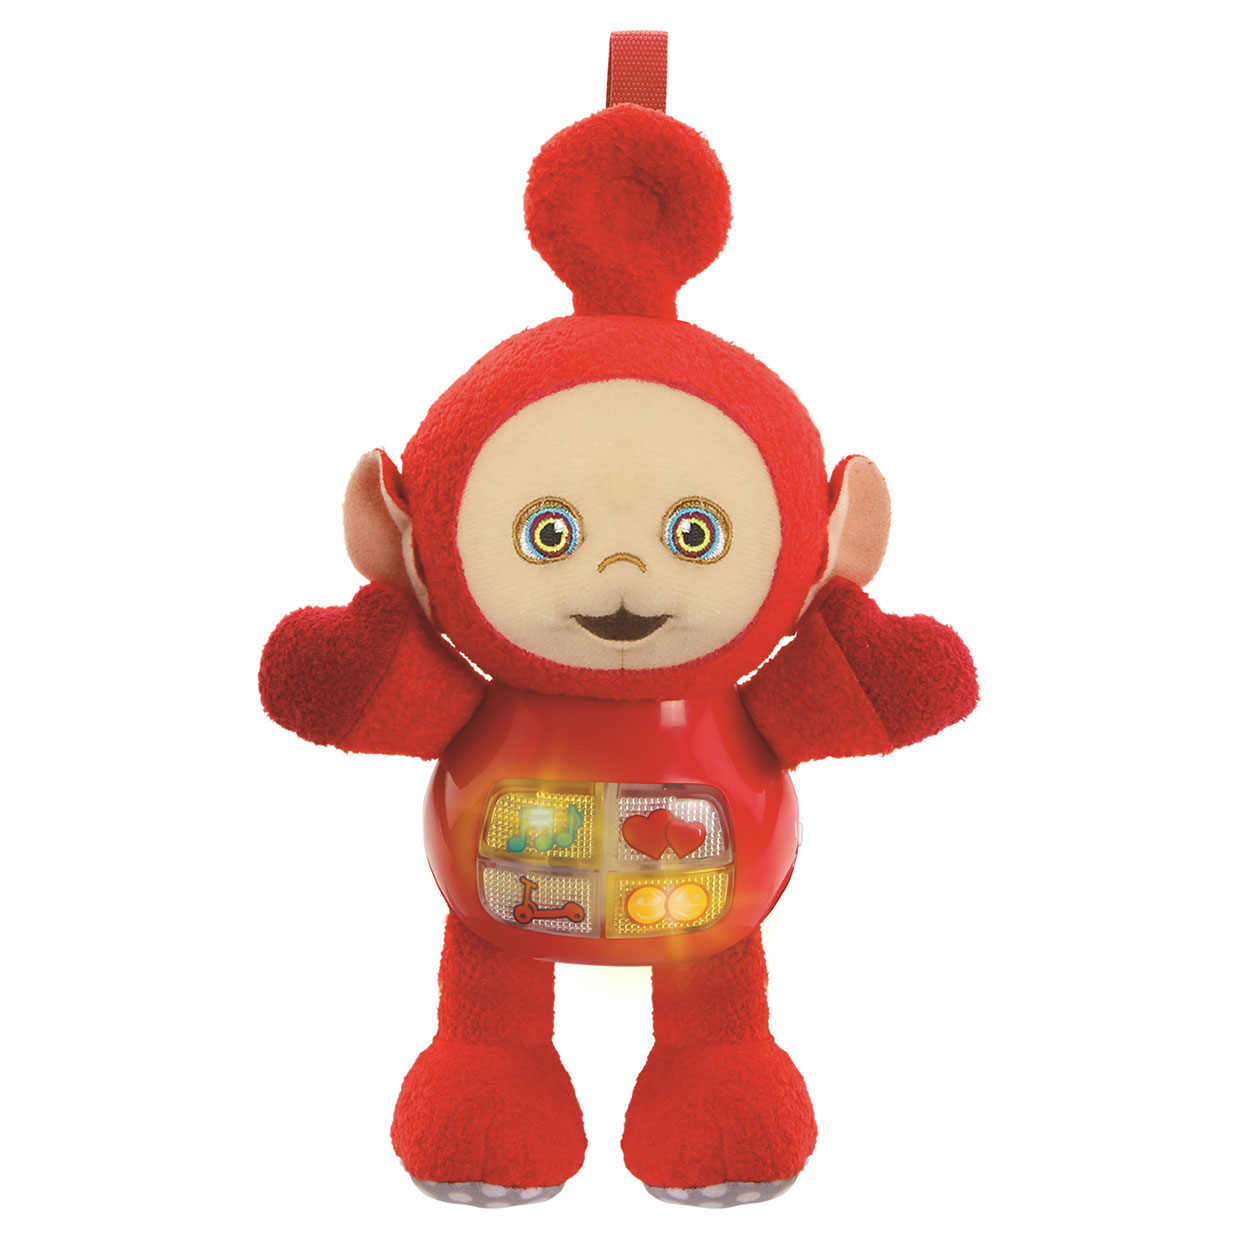 Vtech Press & Play Teletubbies Po Interactive Soft Toy for 3-18 months 